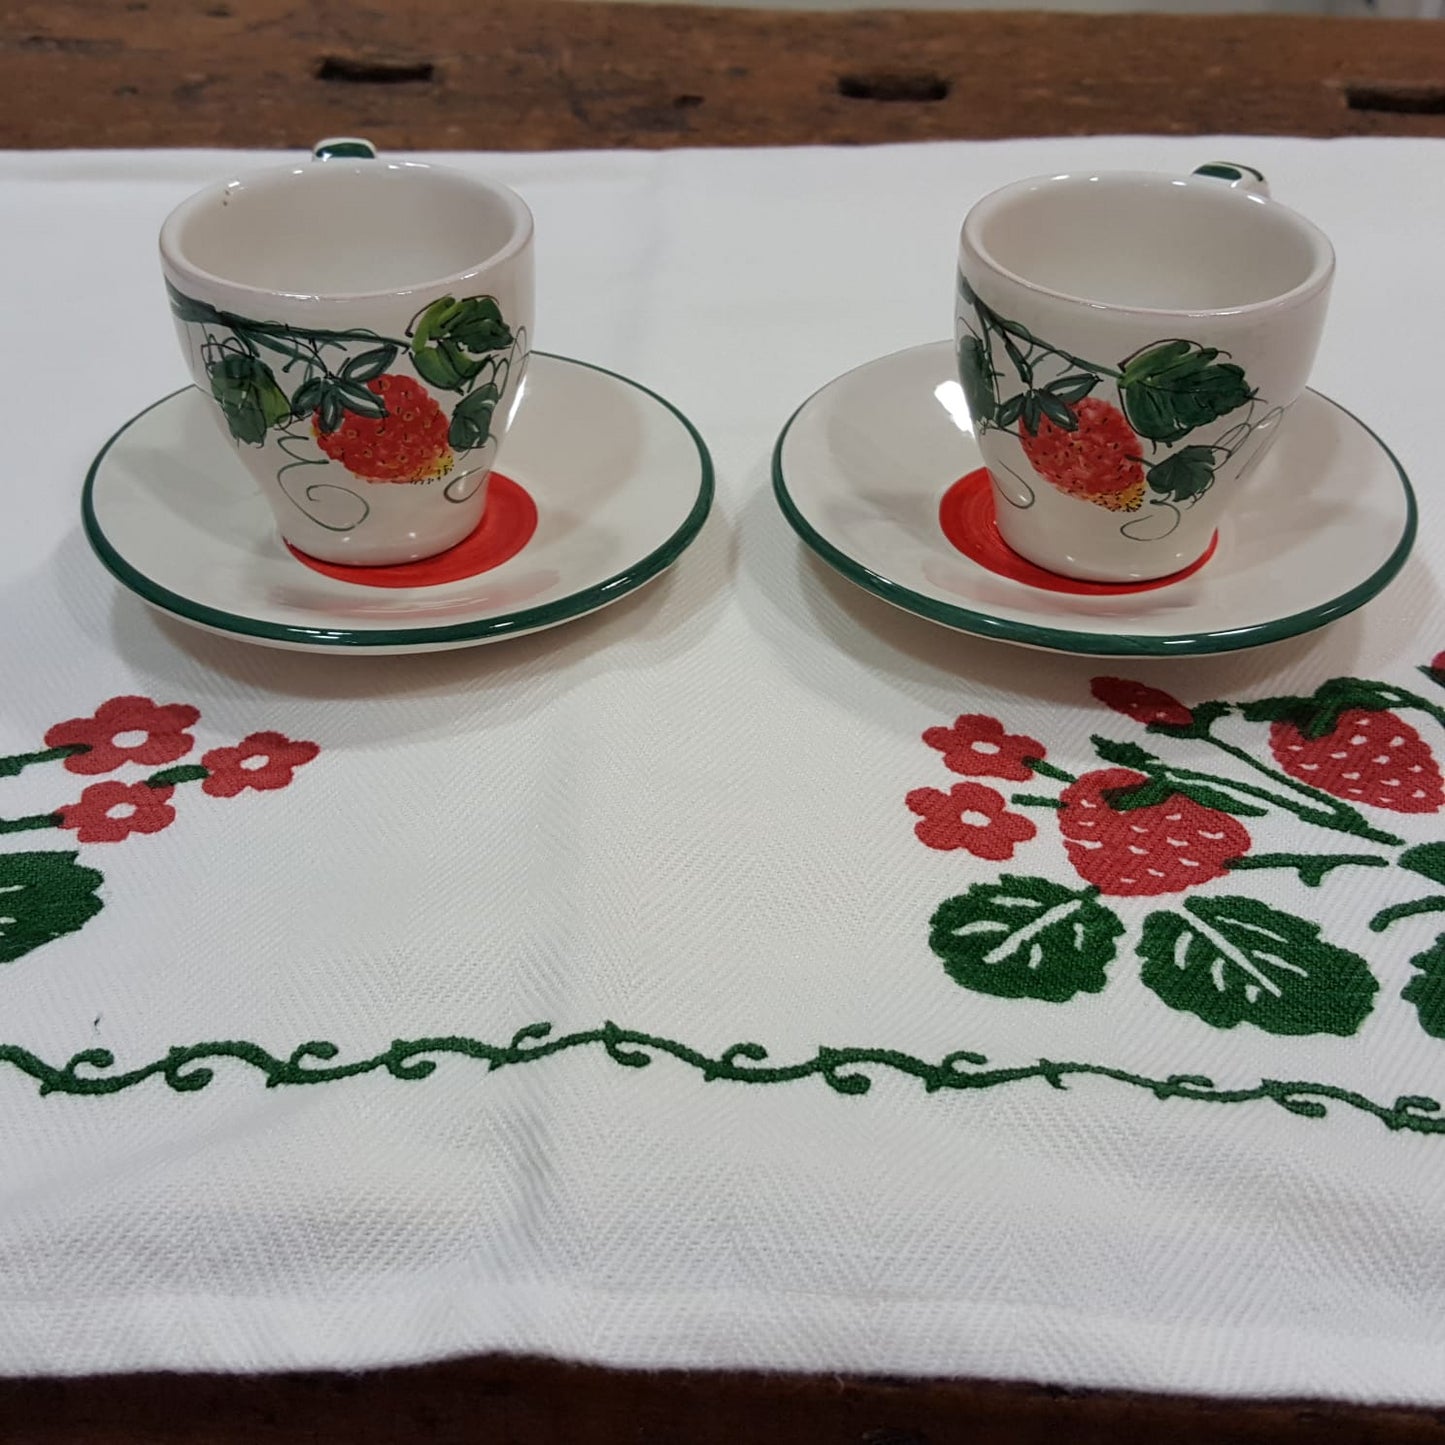 Hand painted ceramic coffee cups with strawberry decorations